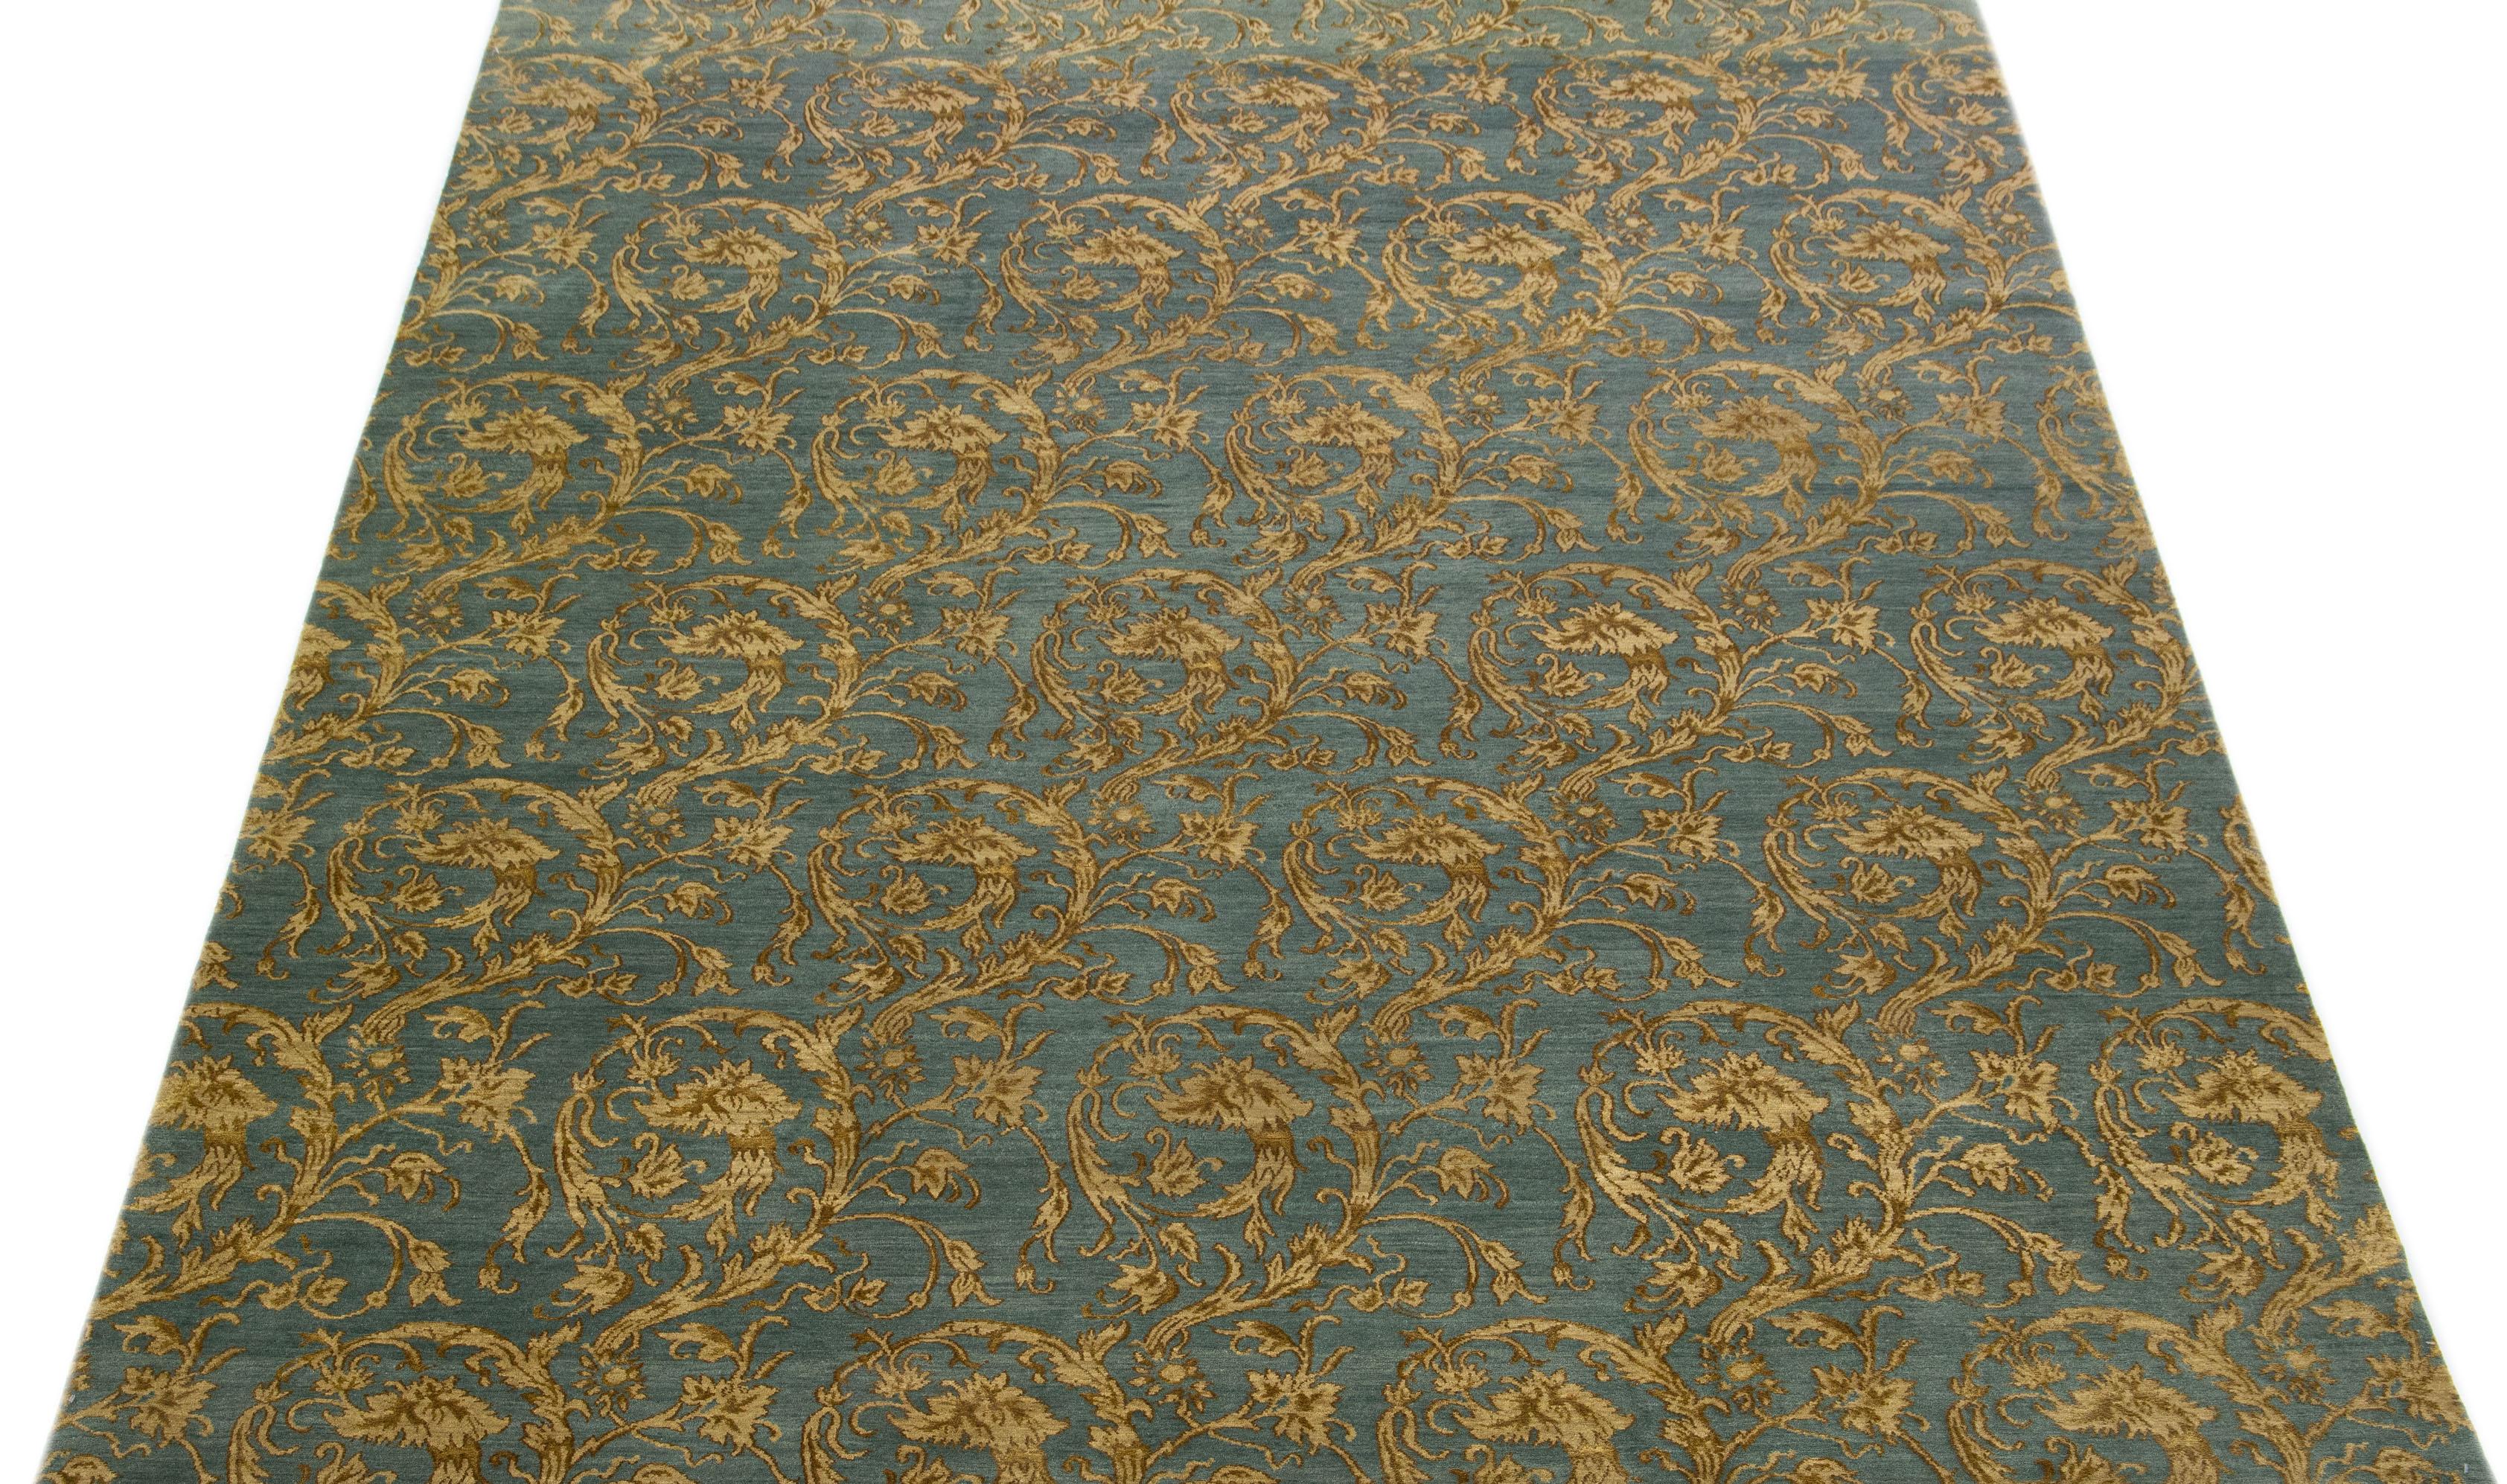 Beautiful modern Tibetan hand knotted wool and silk rug with a blue color field. This Tibetan rug has golden accents in a gorgeously damask pattern design.

This rug measures 8'8